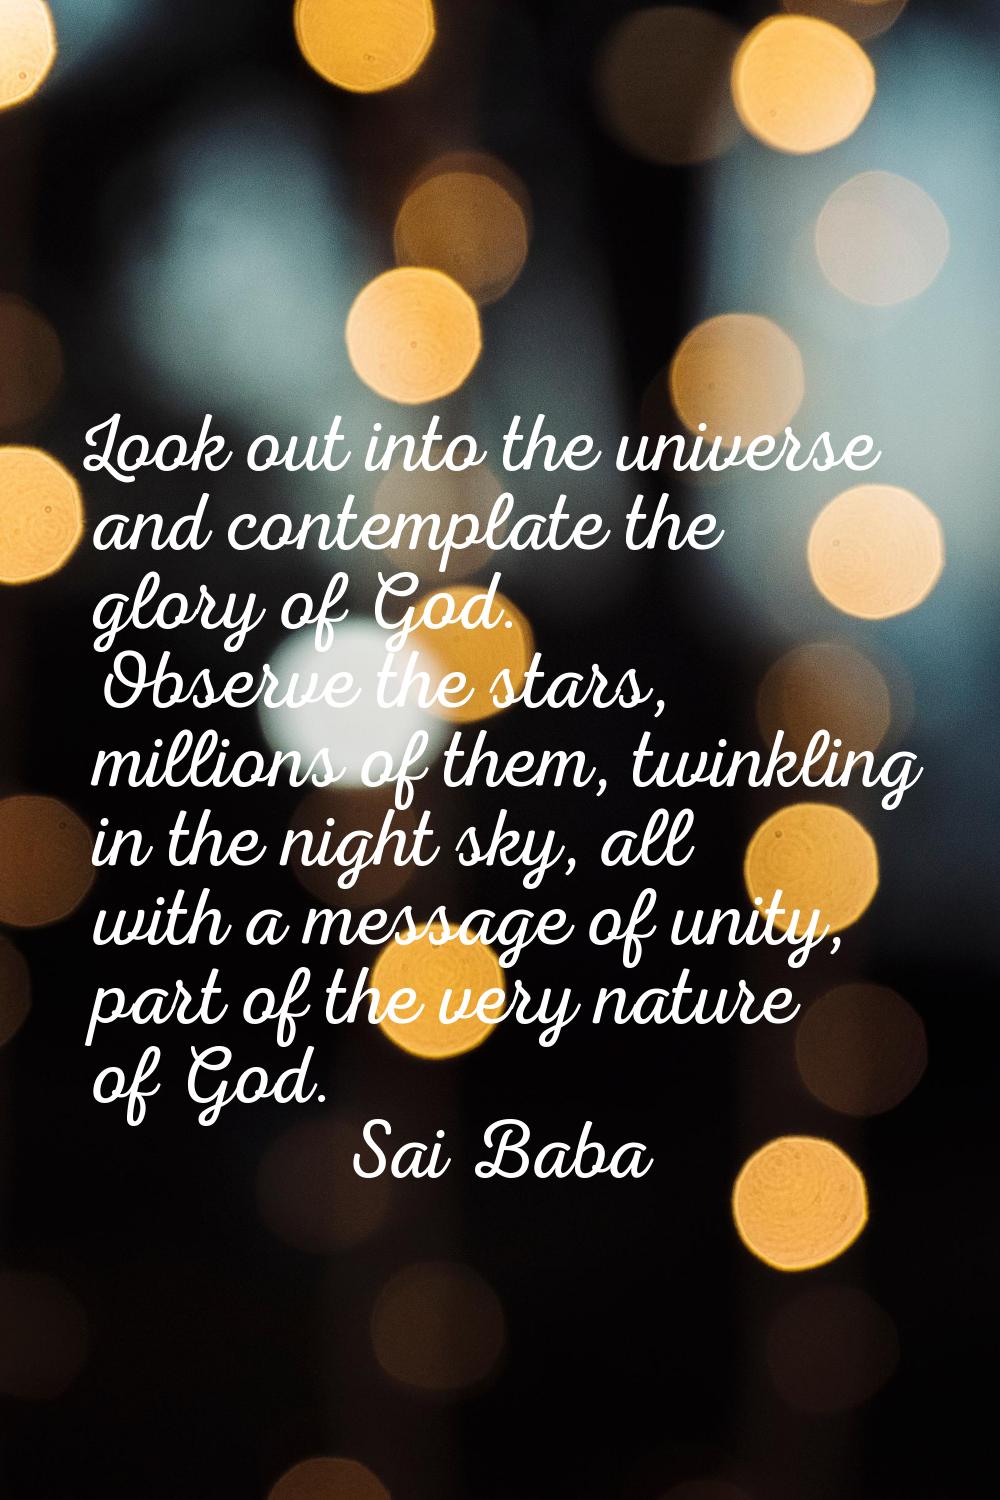 Look out into the universe and contemplate the glory of God. Observe the stars, millions of them, t